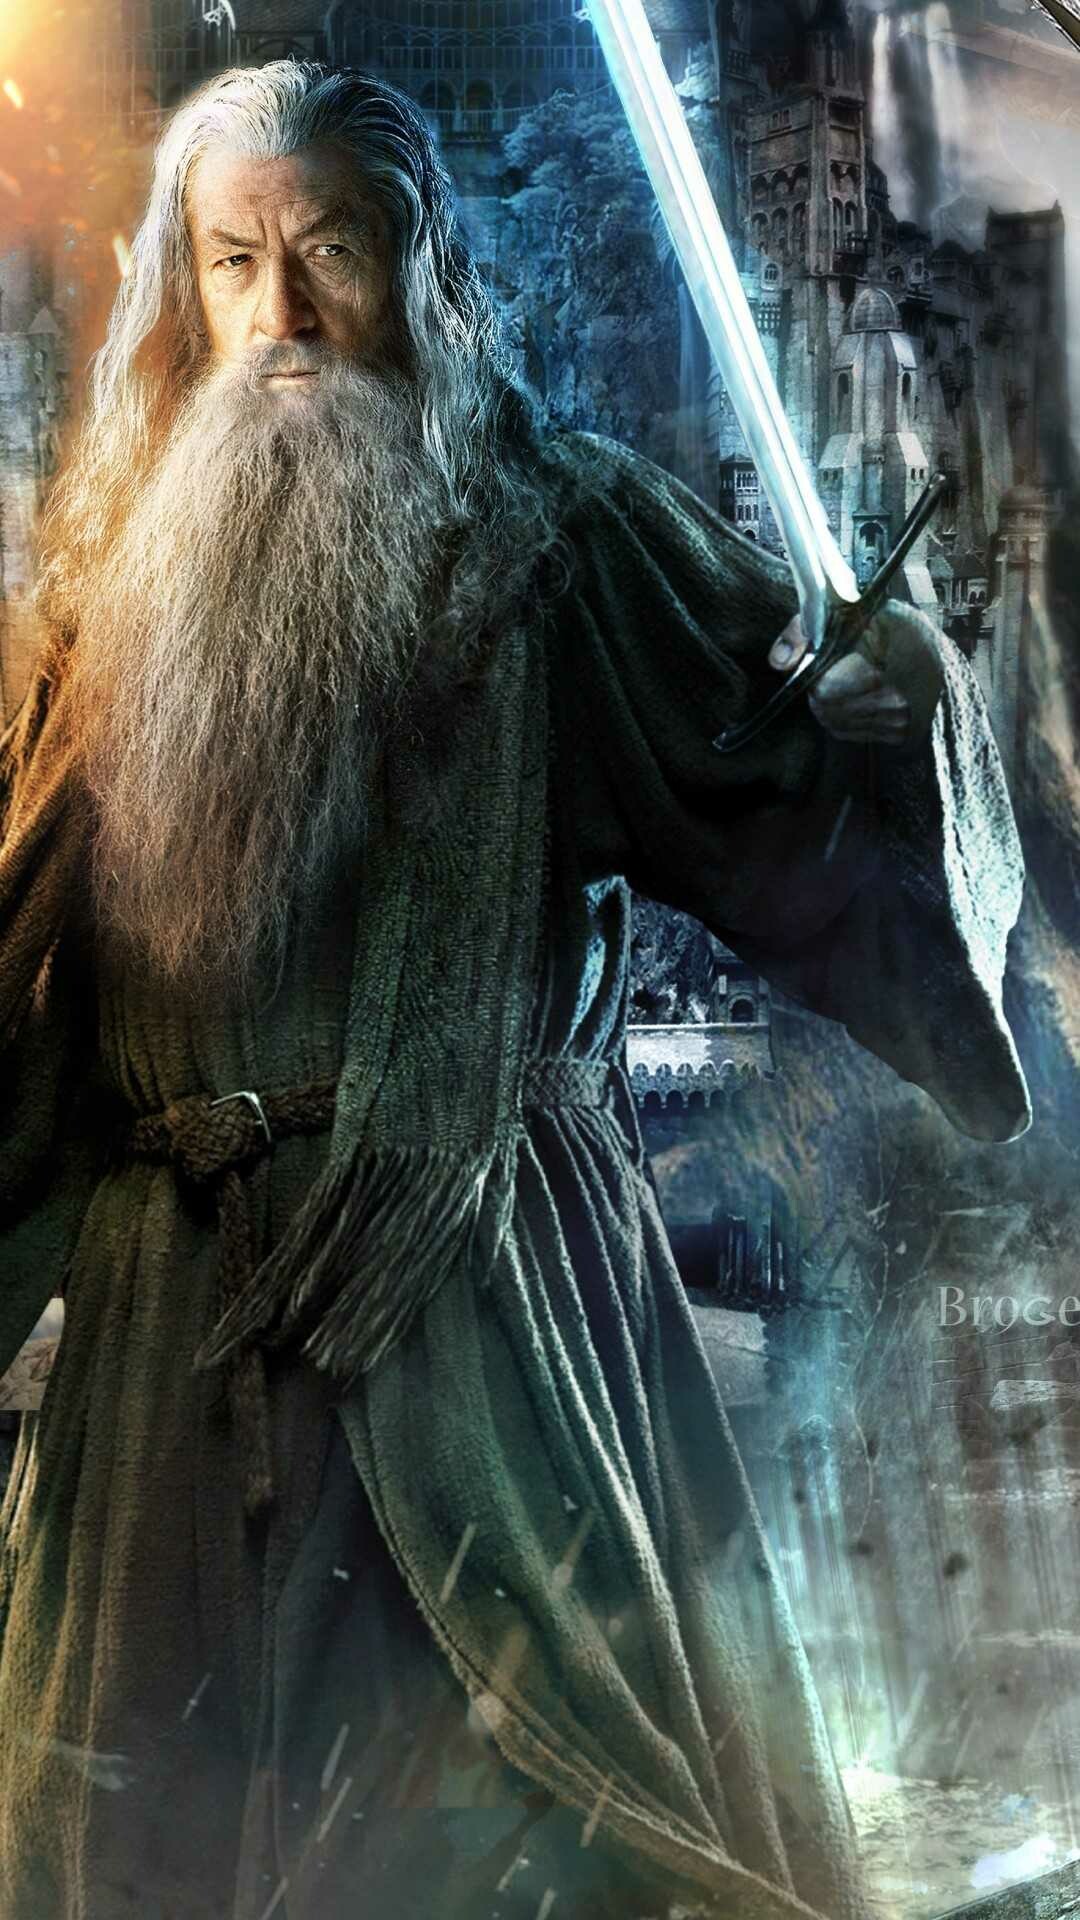 The Hobbit: Gandalf, A wizard, one of the Istari order, and the leader of the Fellowship of the Ring. 1080x1920 Full HD Wallpaper.